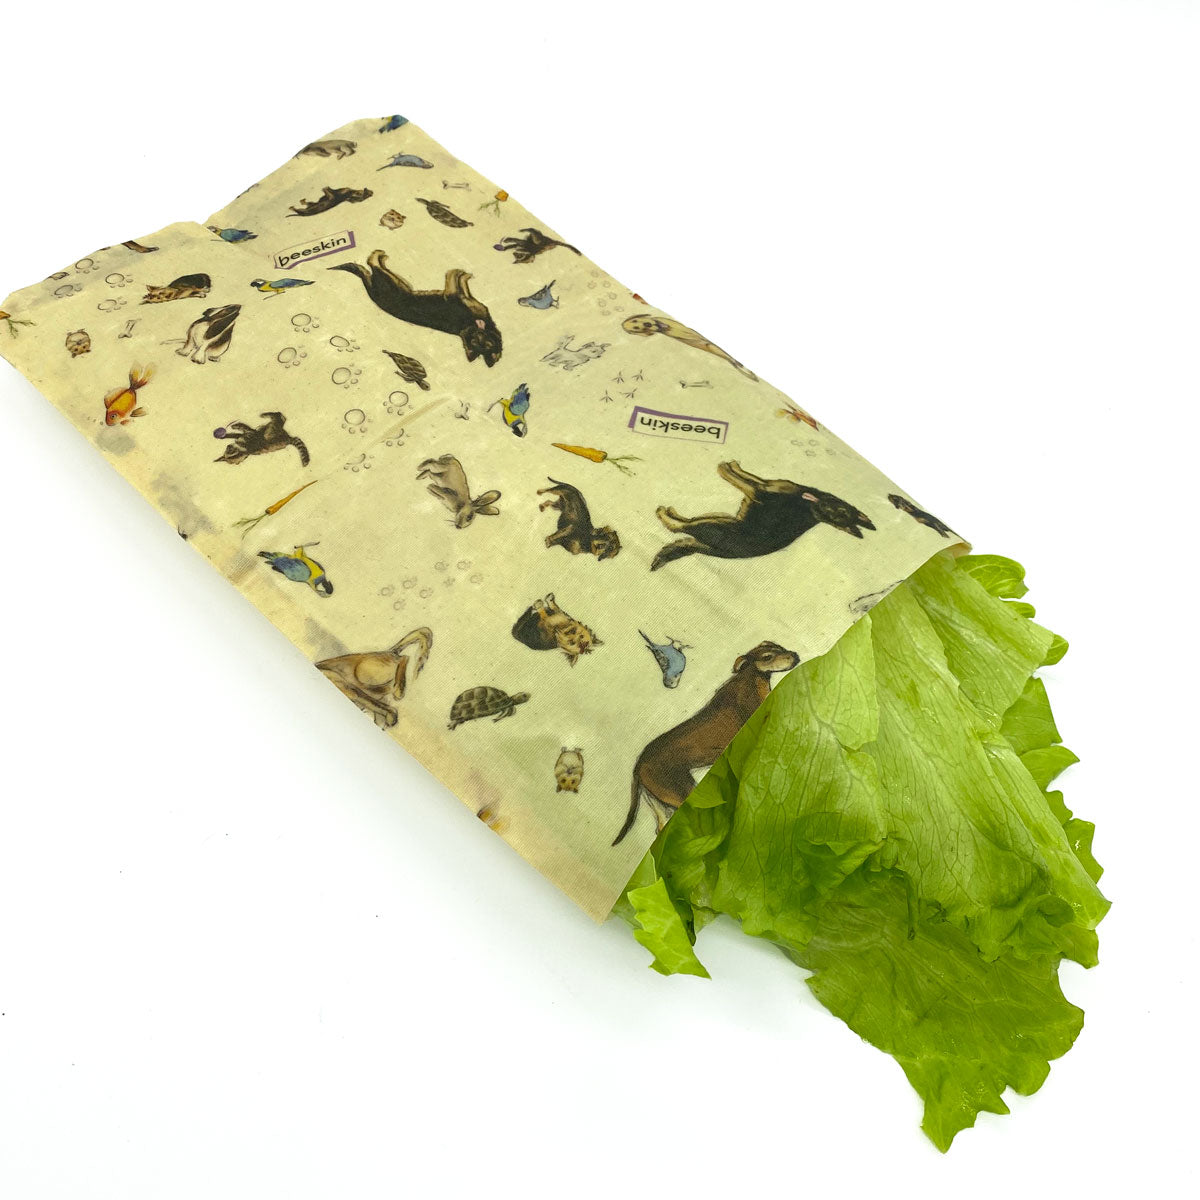 salad stored in a beeskin beeswax bag s with different animals on it